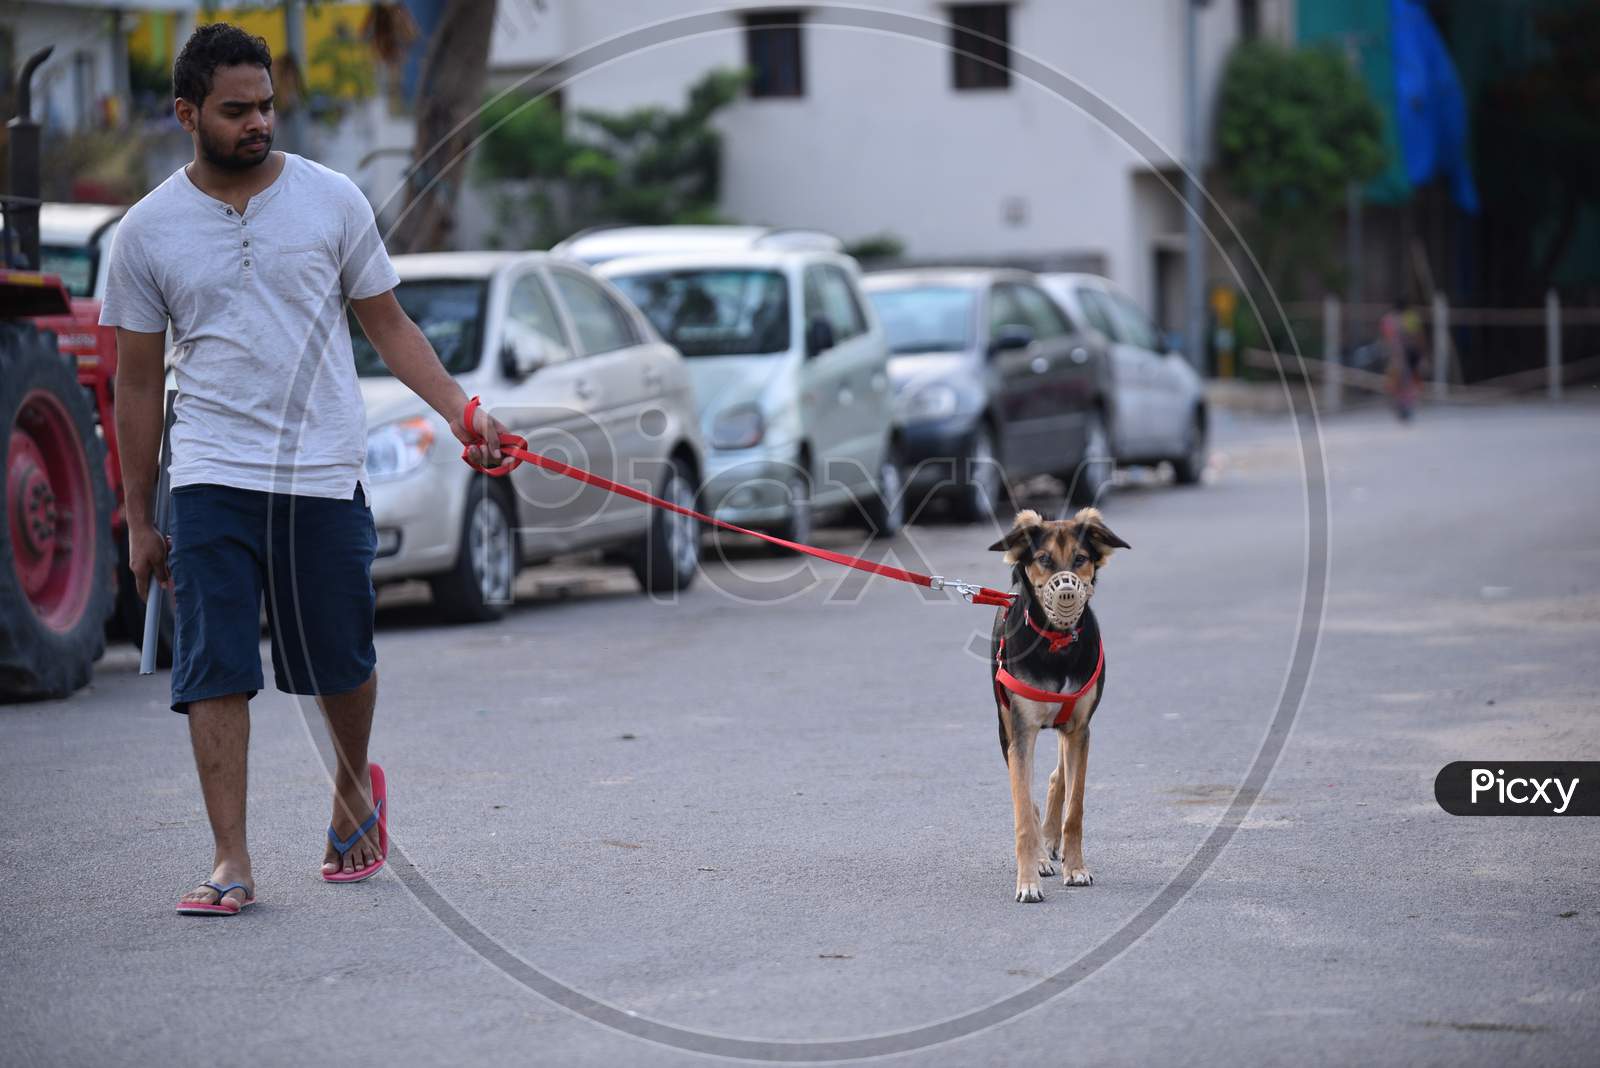 A pet dog's face covered with a mask amid the fears of coronavirus, Hyderabad, May 22, 2020.